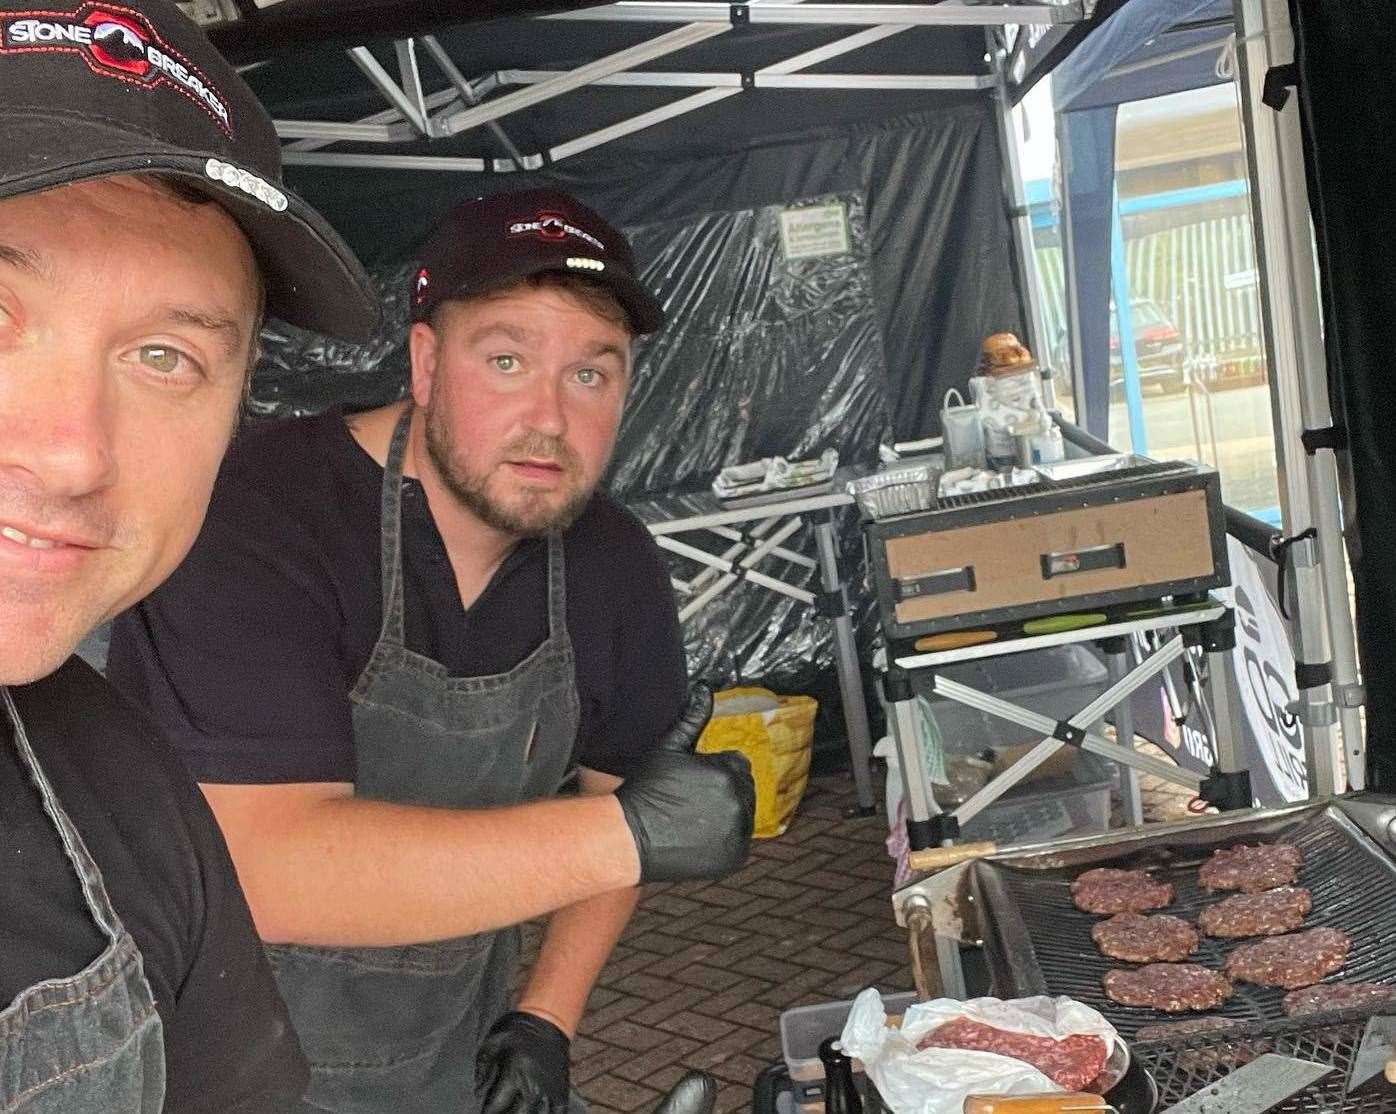 They have appeared at various festivals. Picture: The Grumpy Dads Grill